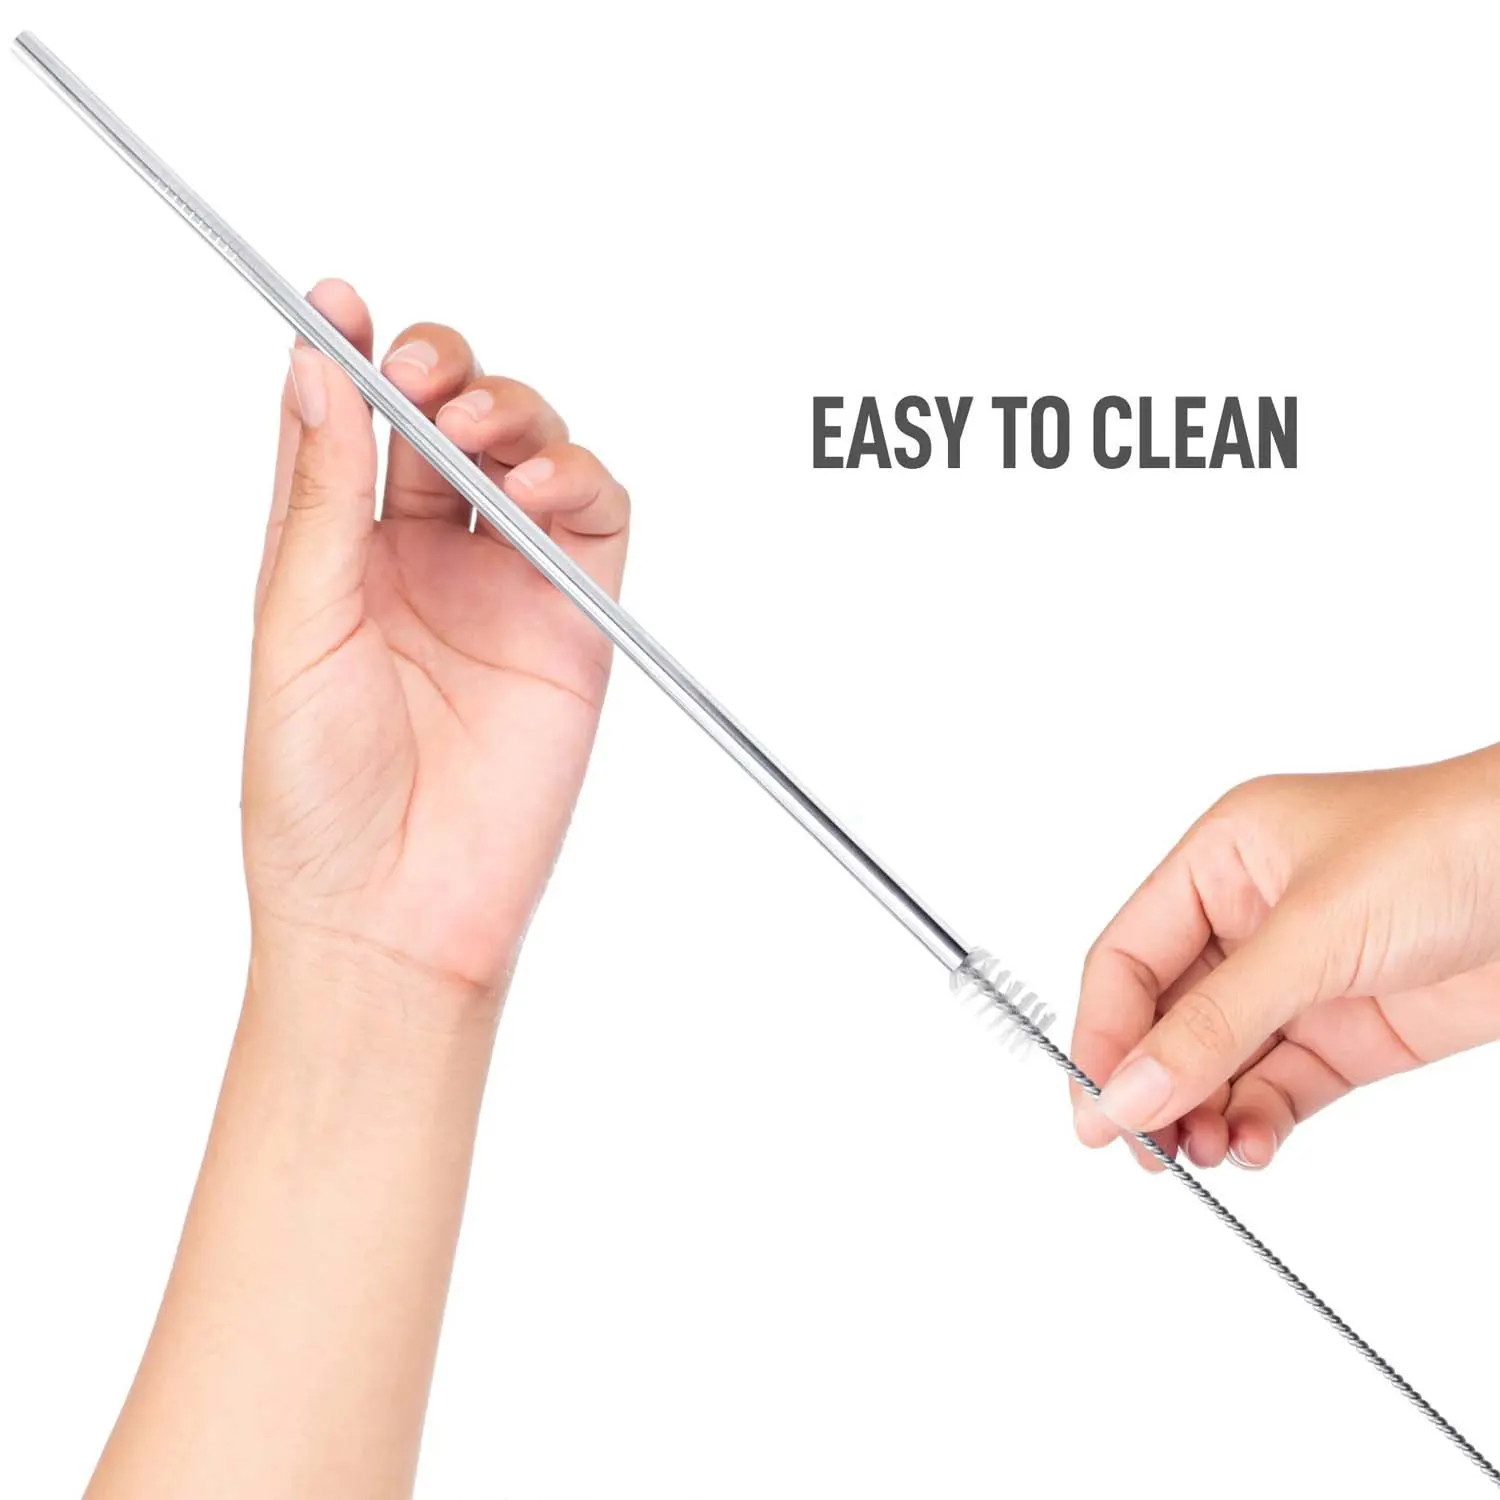 Stainless Steel Straws - Eco-Friendly Reusable Straws - Set of 2 with Cleaning Brush